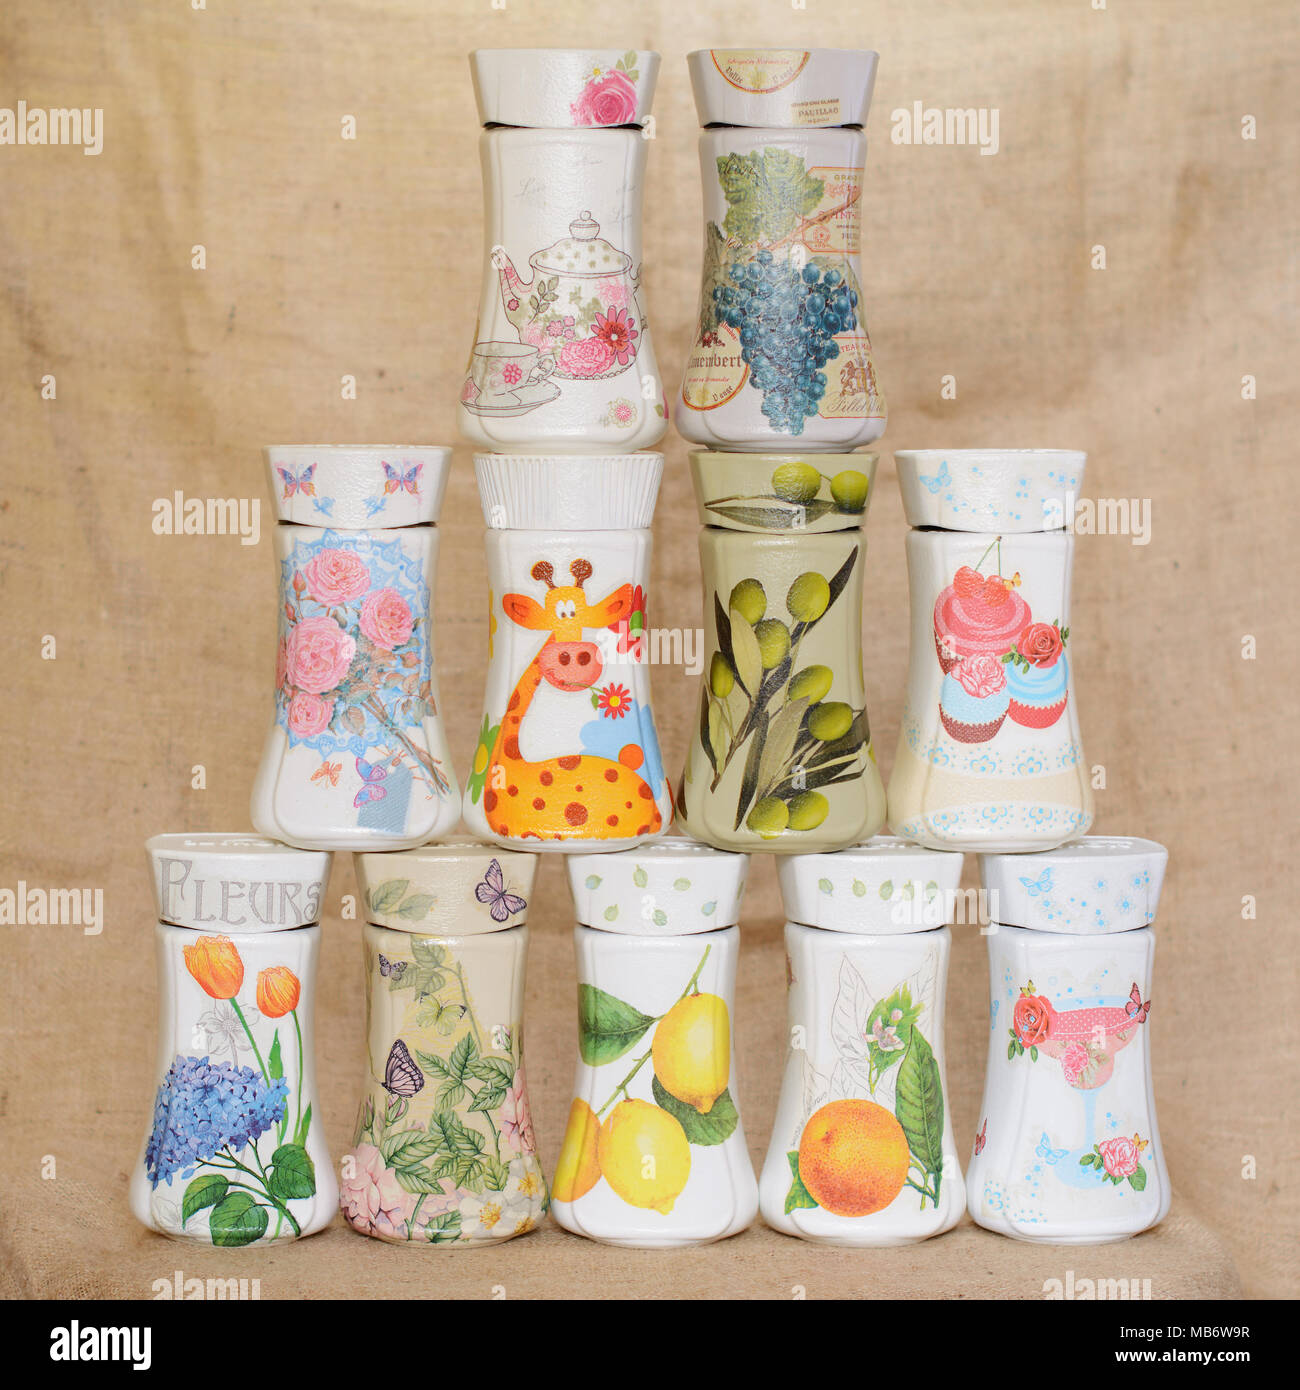 Decoupaged jars arranged in a triangular manner. Jars have different decorative motifs. One of the jars has written on it word Flowers in French. Stock Photo